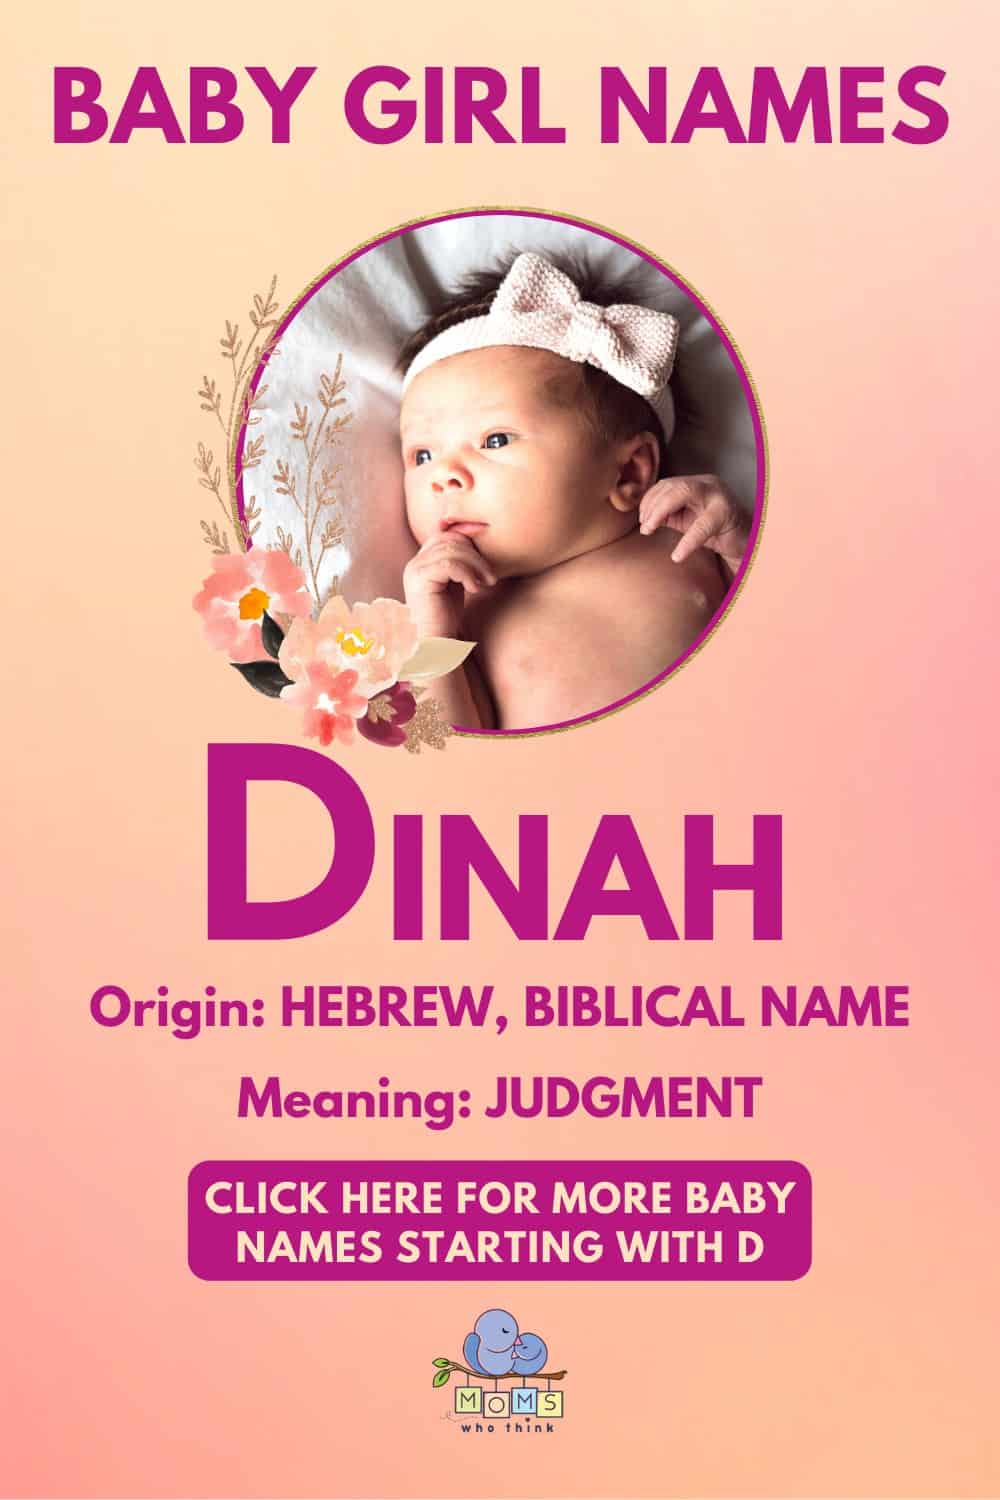 Baby girl name meanings - Dinah